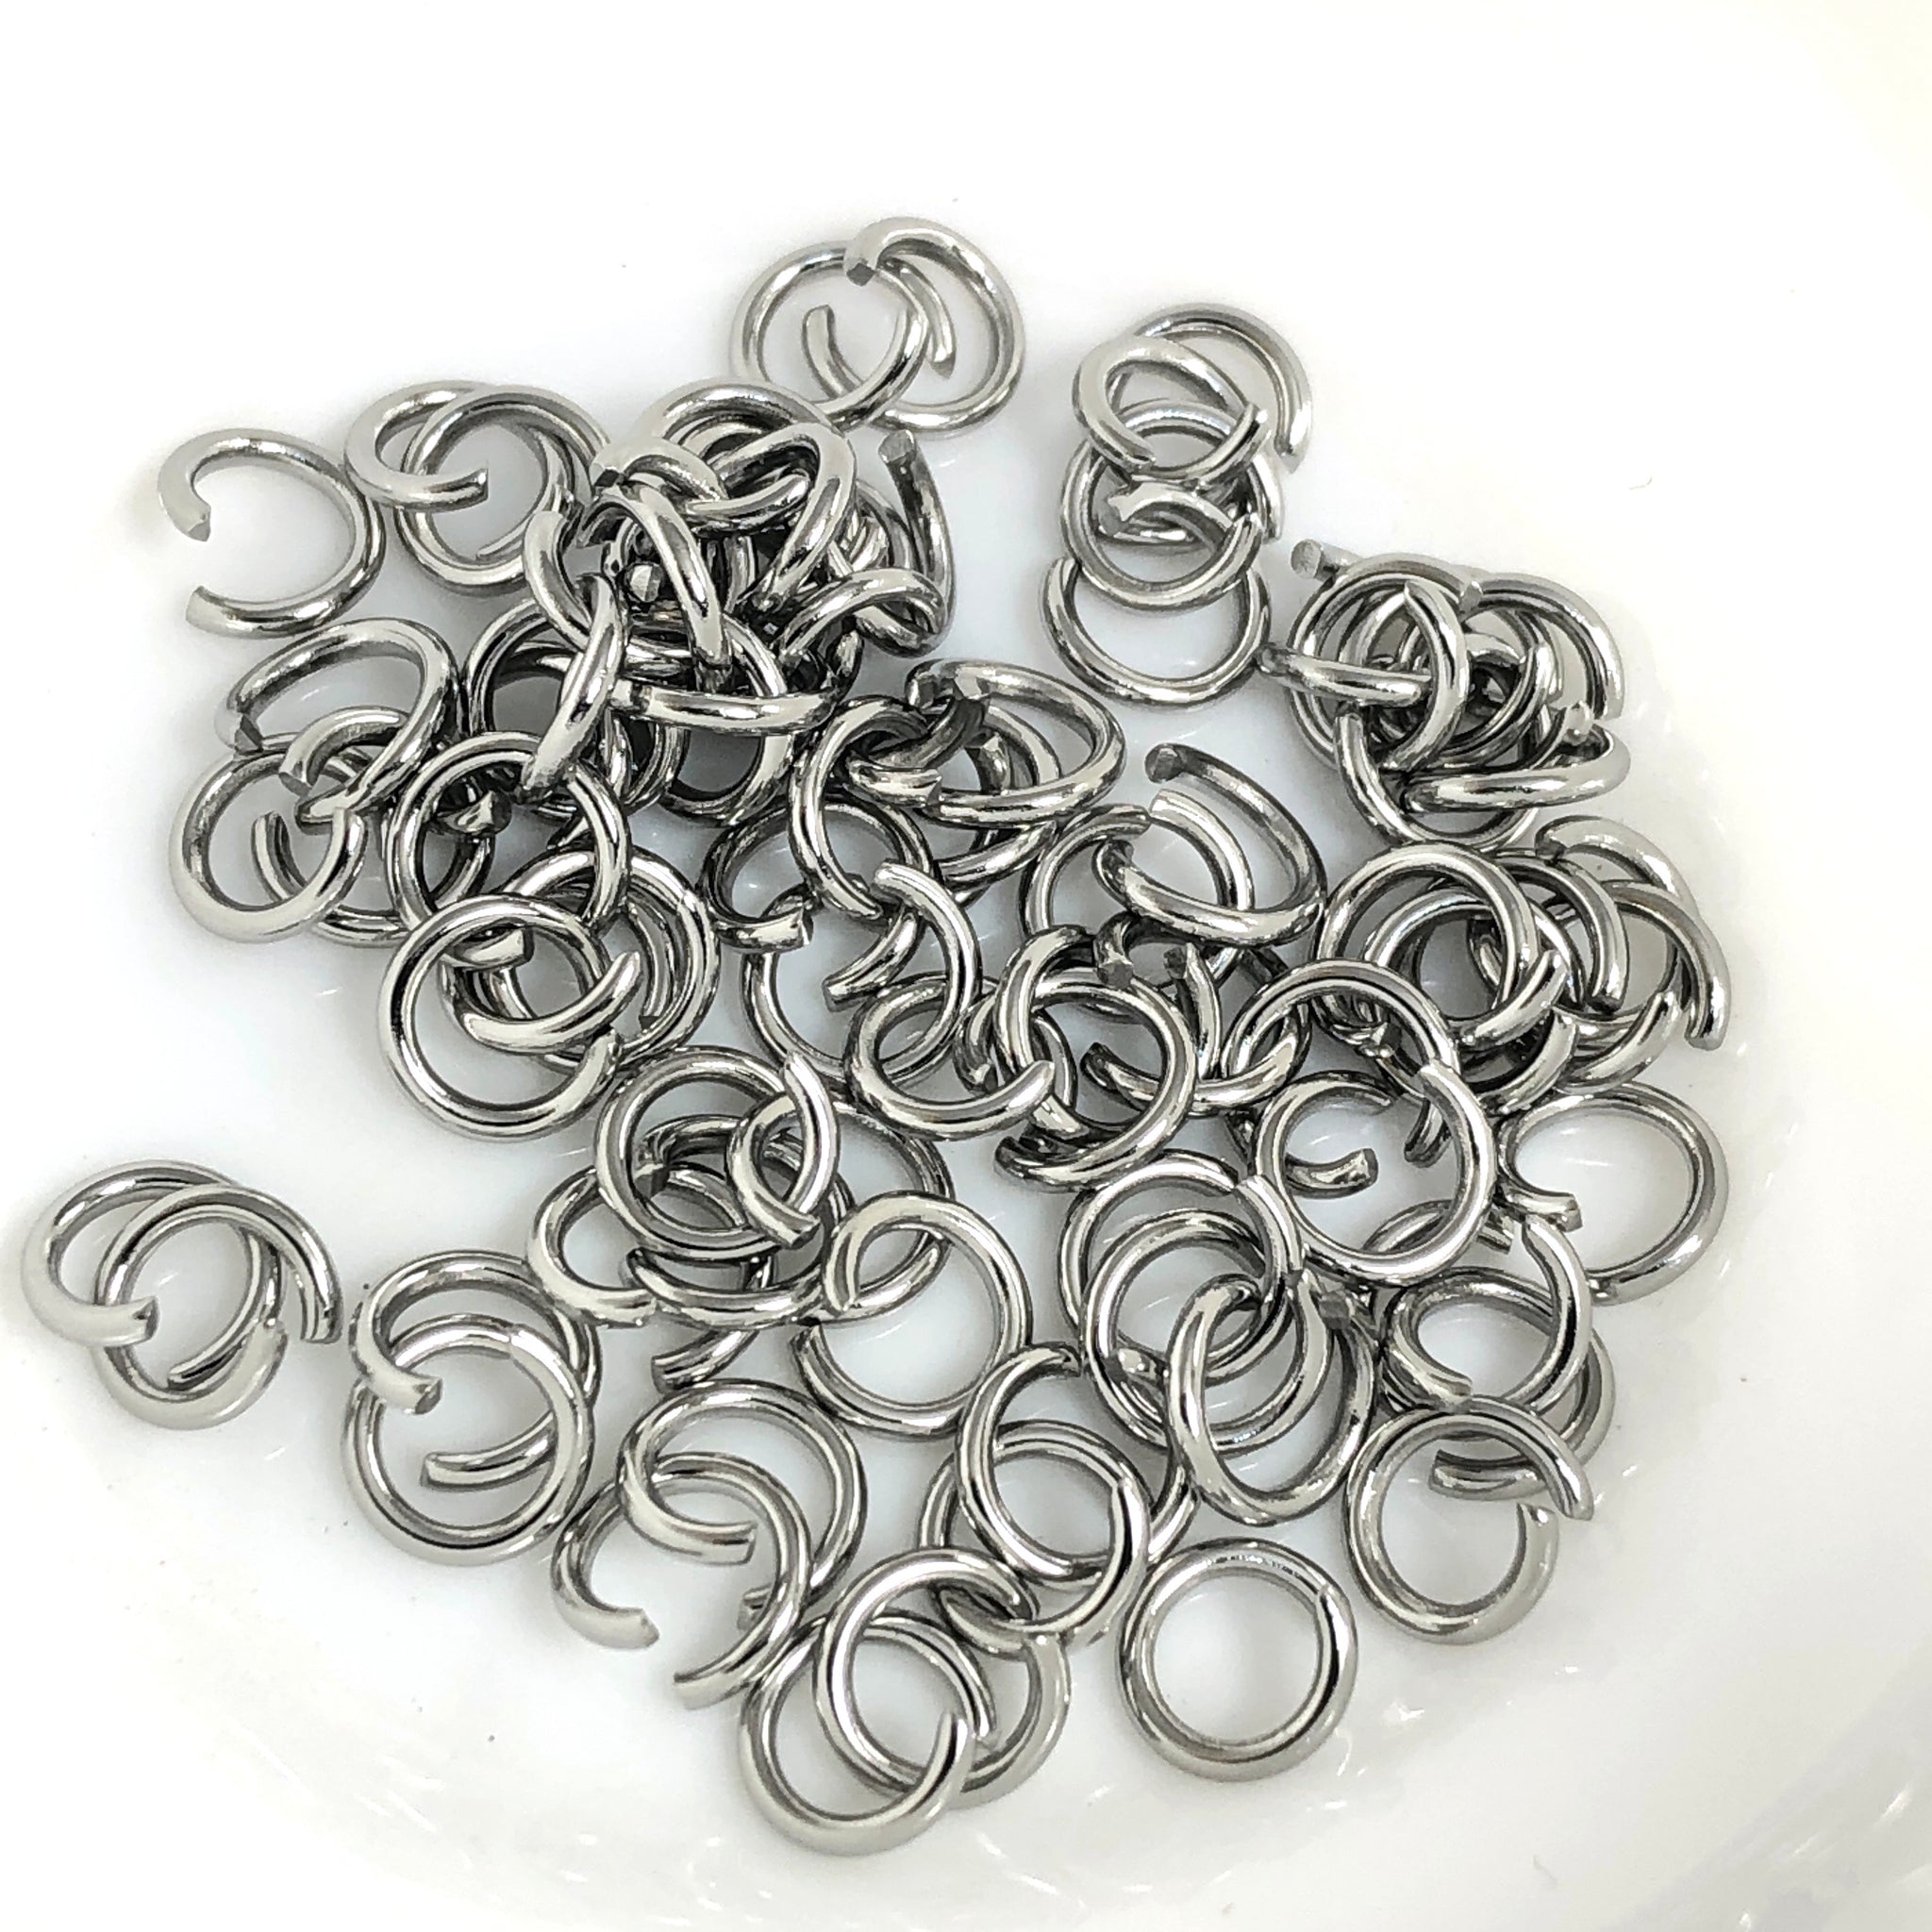 Stainless Steel Jump Rings 6 mm - 200 Pack – Easy Crafts